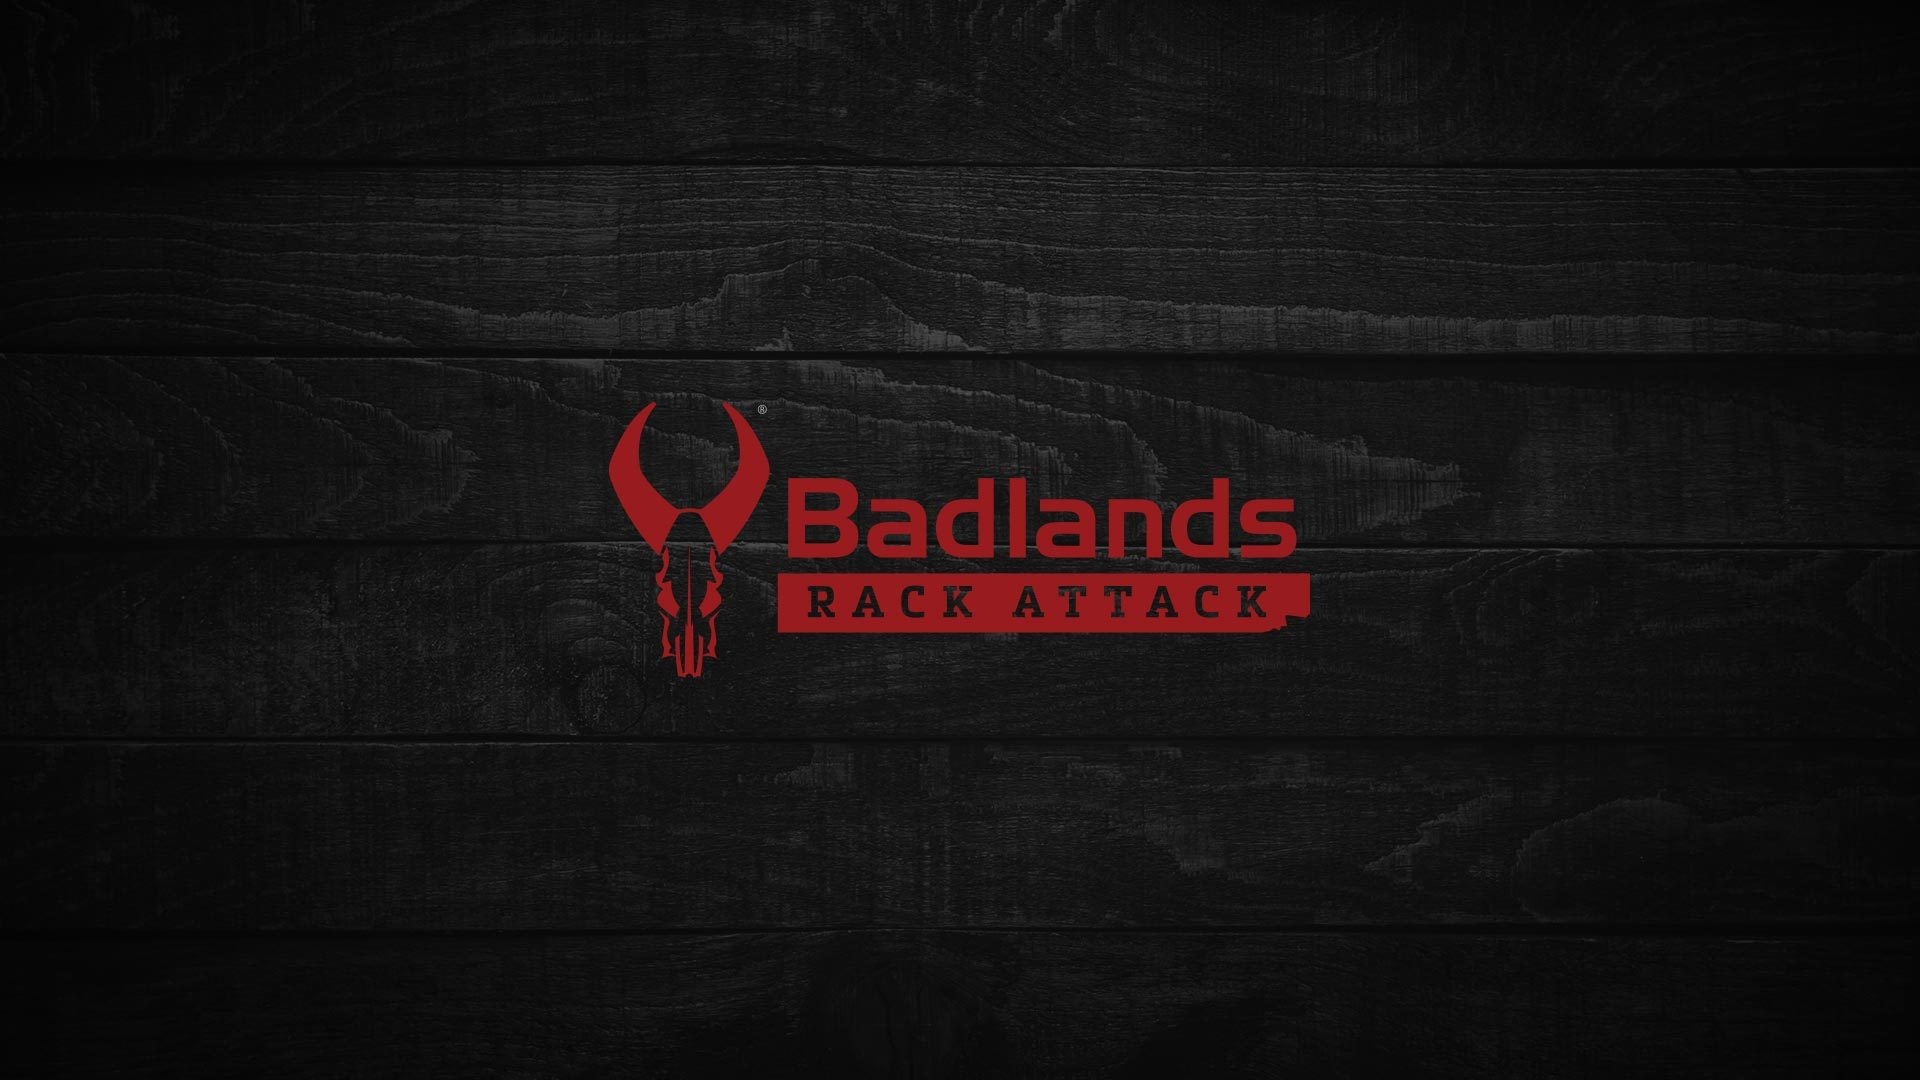 Badlands Rack Attack Season 1 Episode 8: Your Hunting Gear Questions Answered and a Dance Party